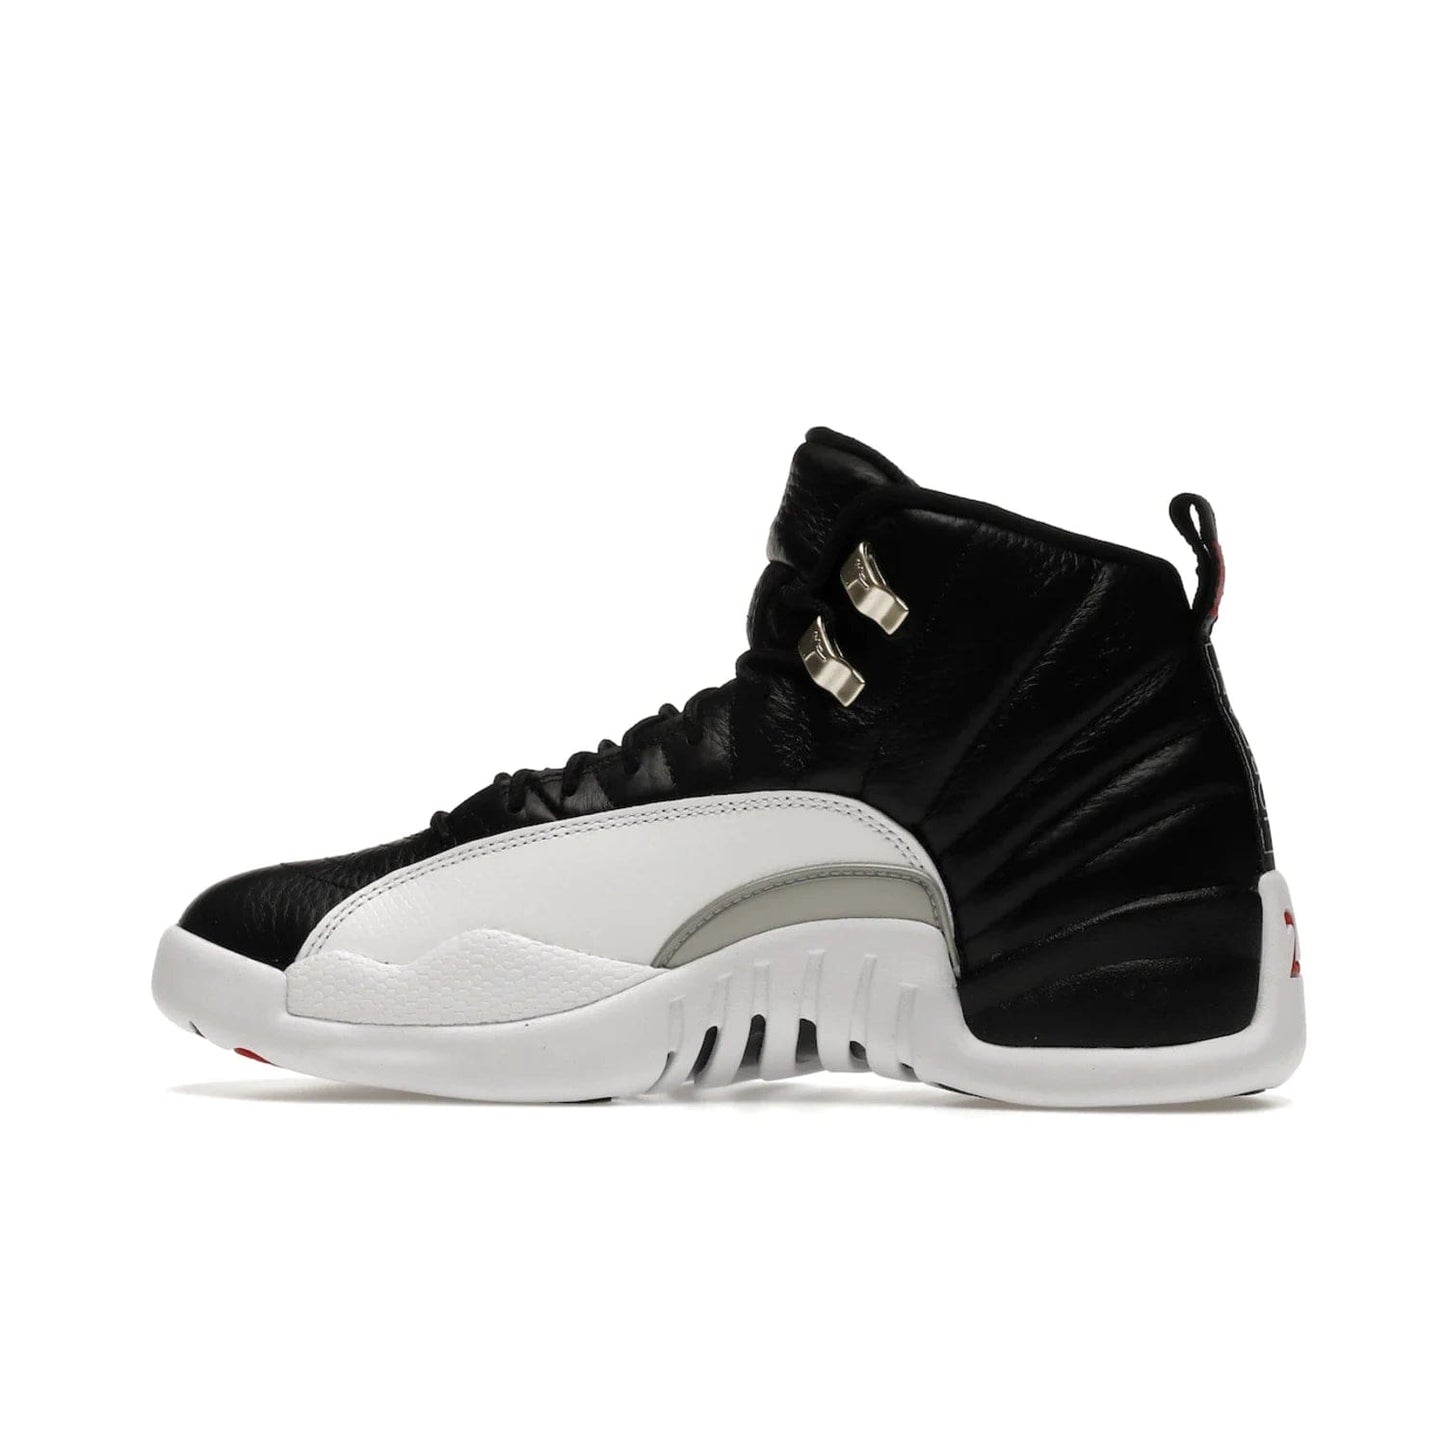 Jordan 12 Retro Playoffs (2022) - Image 20 - Only at www.BallersClubKickz.com - Retro Air Jordan 12 Playoffs. Celebrate 25 years with MJ's iconic shoe. Black tumbled leather upper, white sole with carbon fiber detailing and Jumpman embroidery. Must-have for any Jordan shoe fan. Releases March 2022.